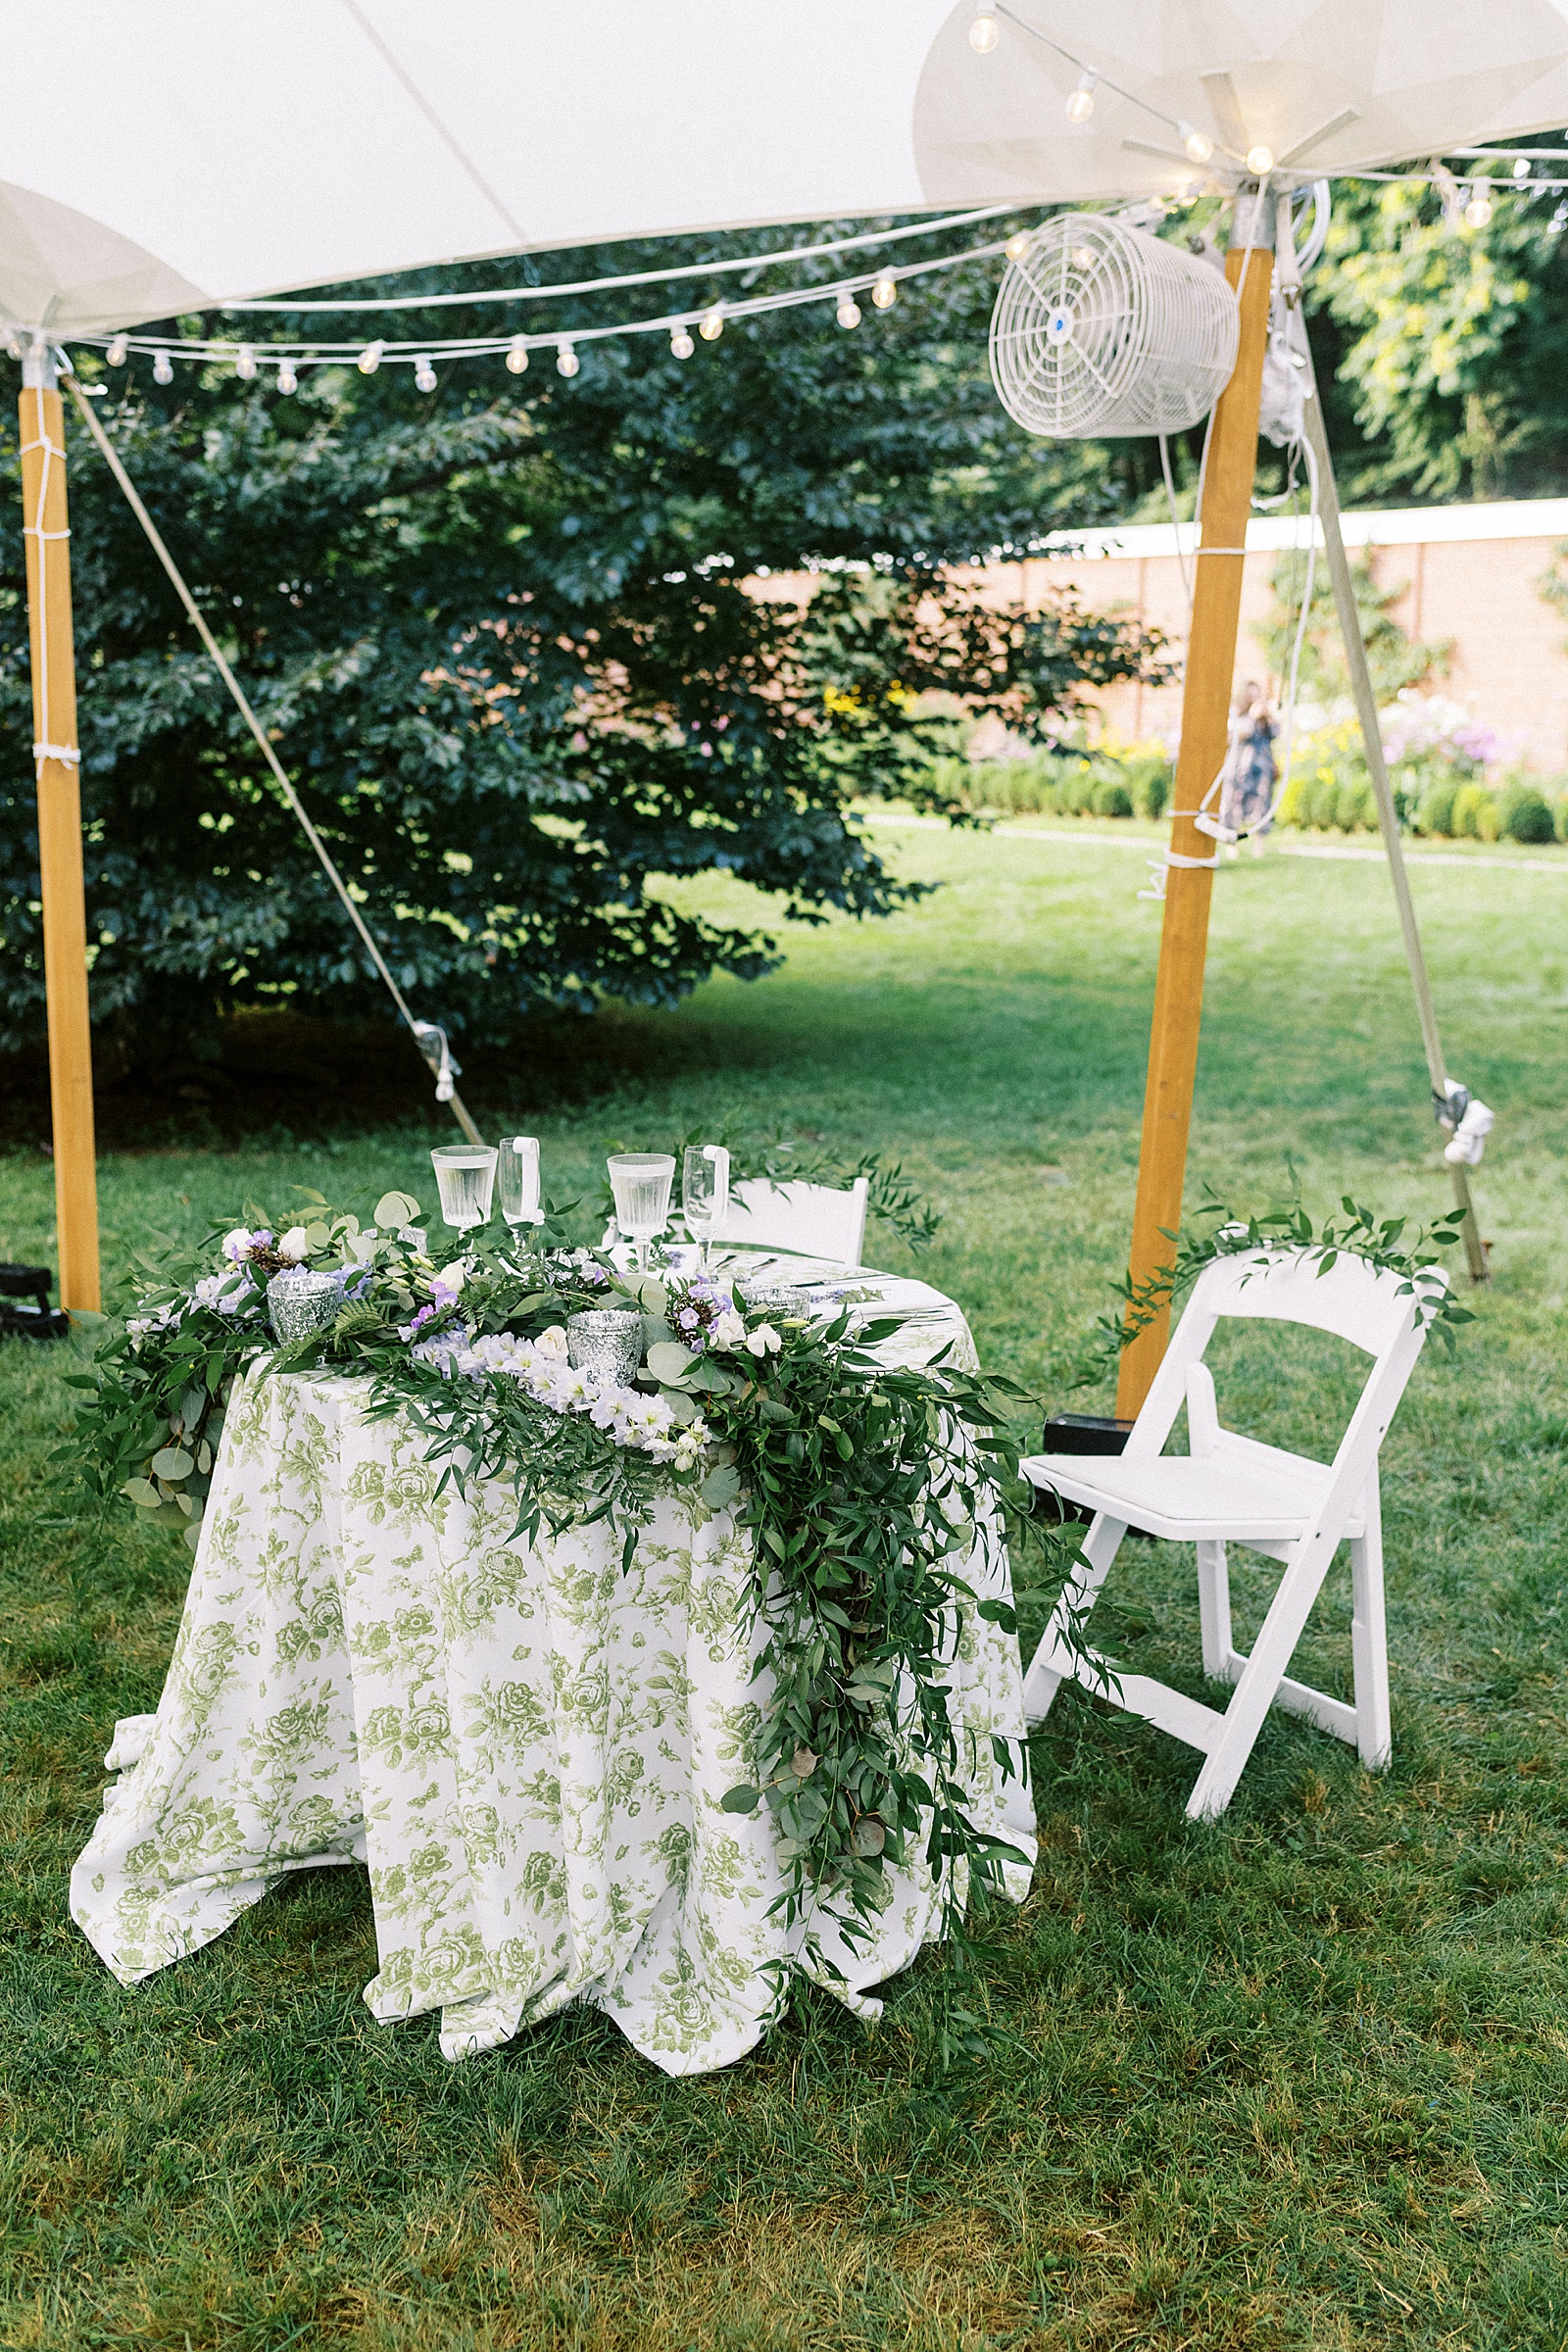 Bride and groom's fully decorated table at their outdoor tented reception at their garden wedding. 